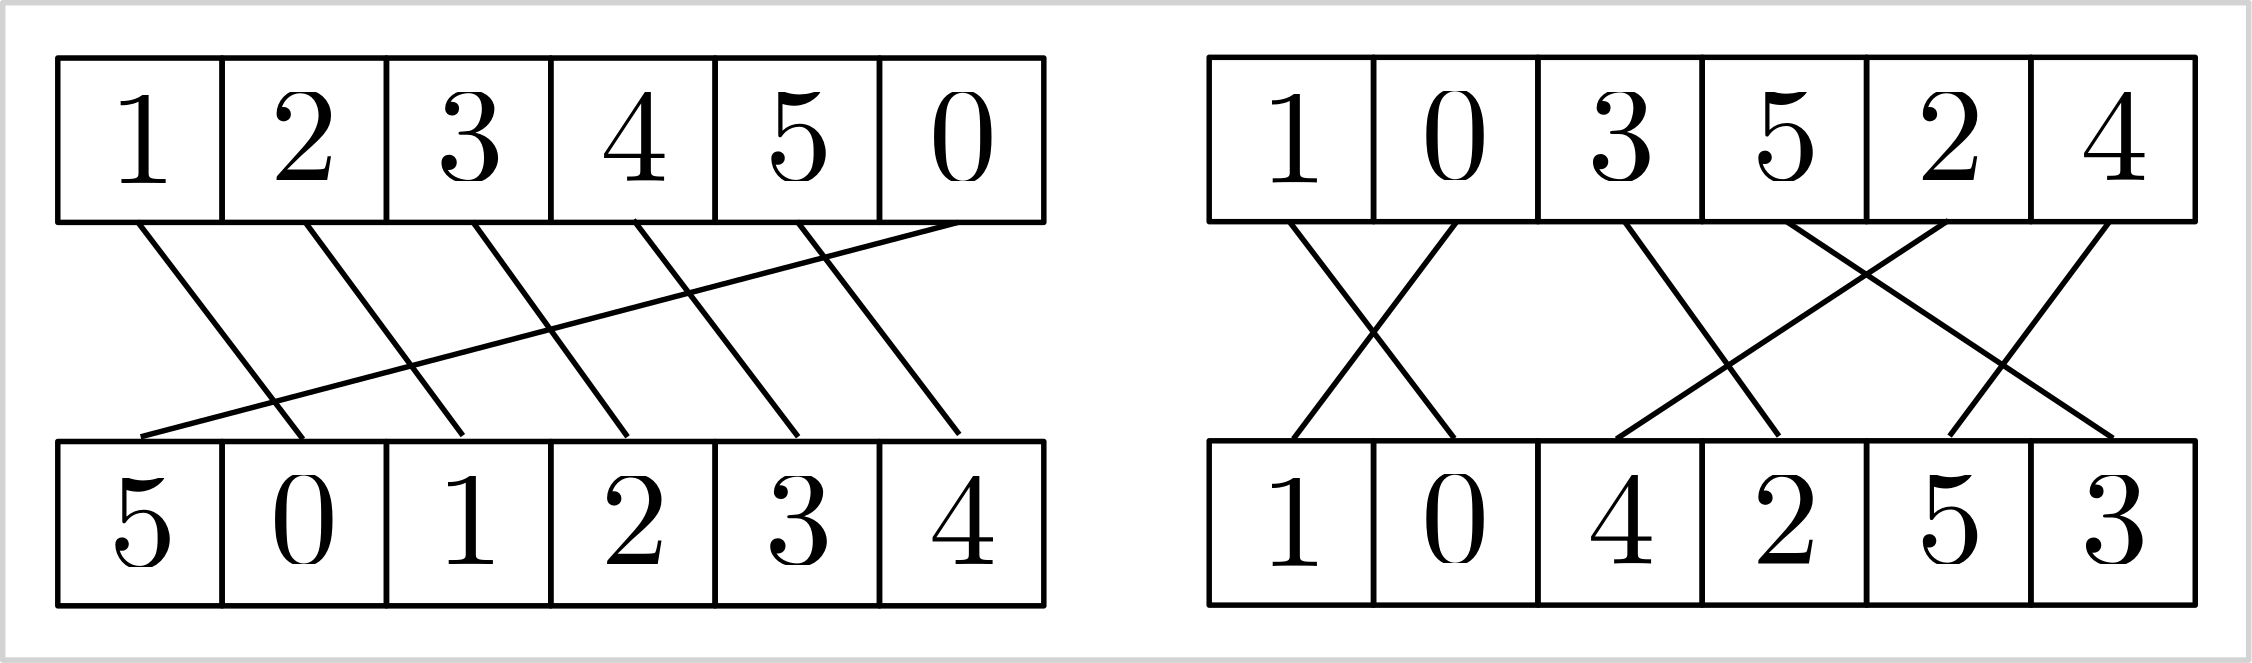 Example Matching